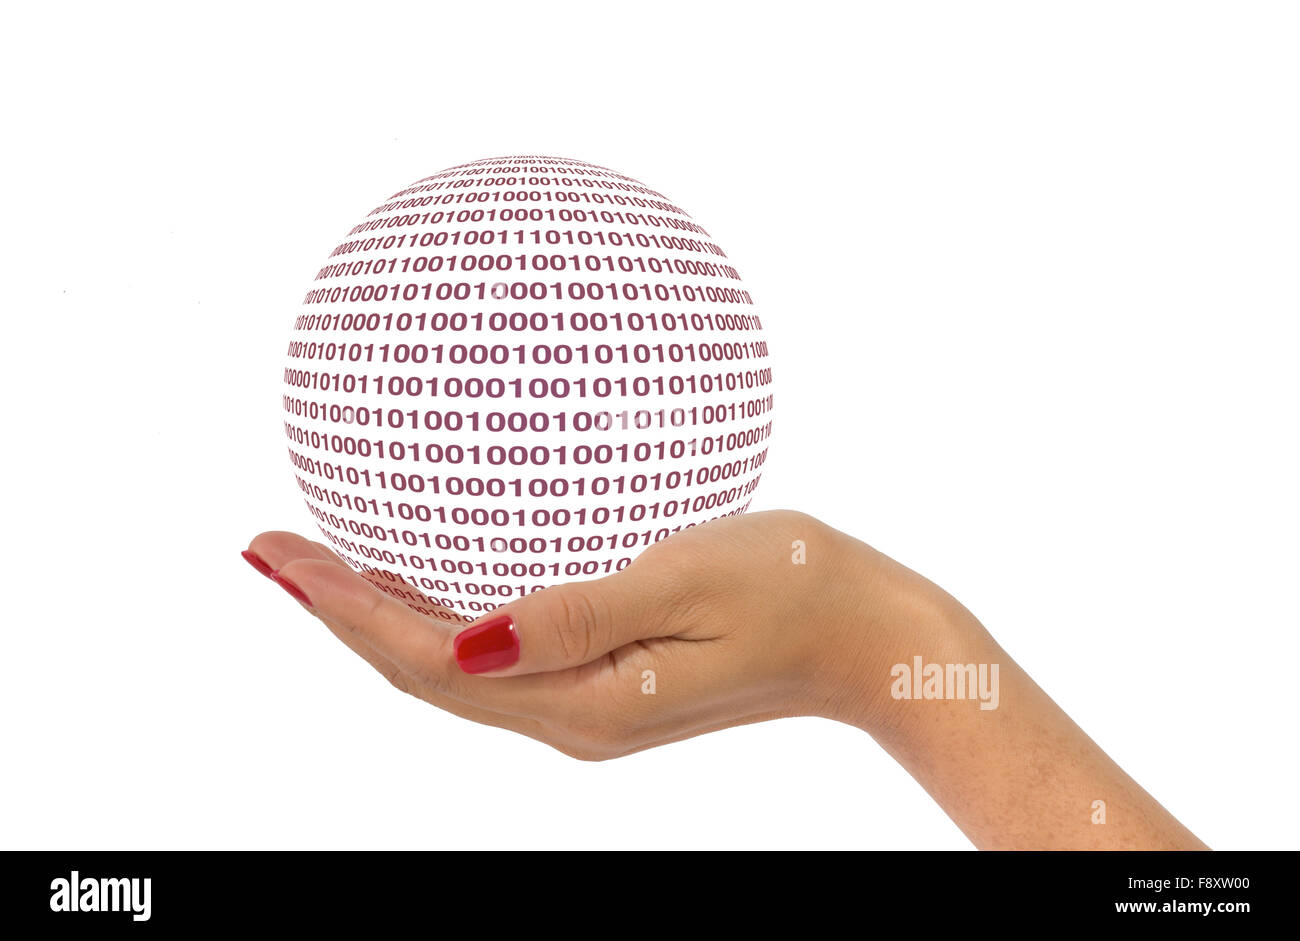 Woman's hand holding a digital ball Stock Photo